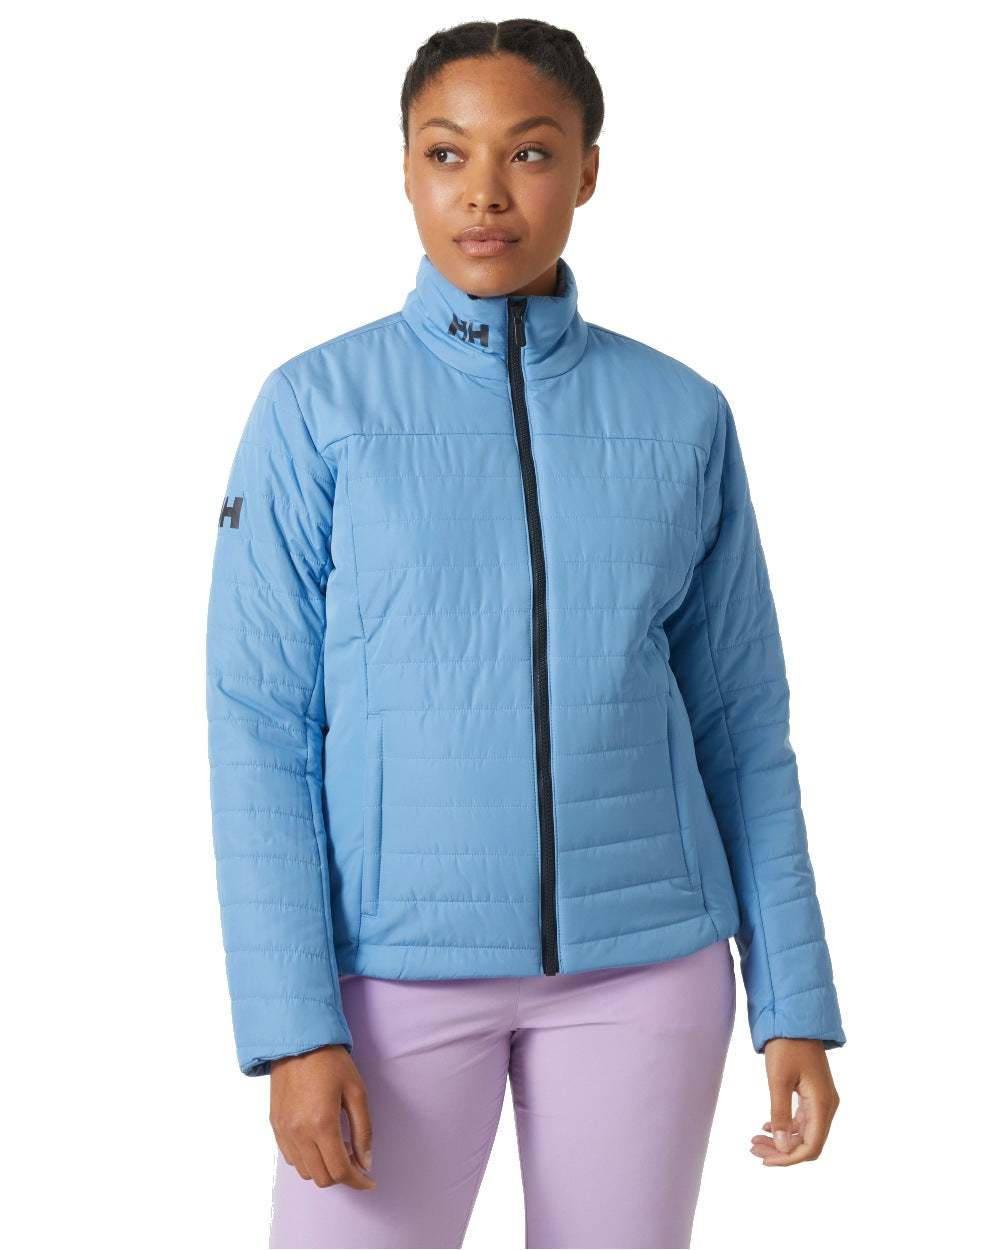 Helly Hansen Womens Crew Insulated Sailing Jacket 2.0 in Bright Blue 